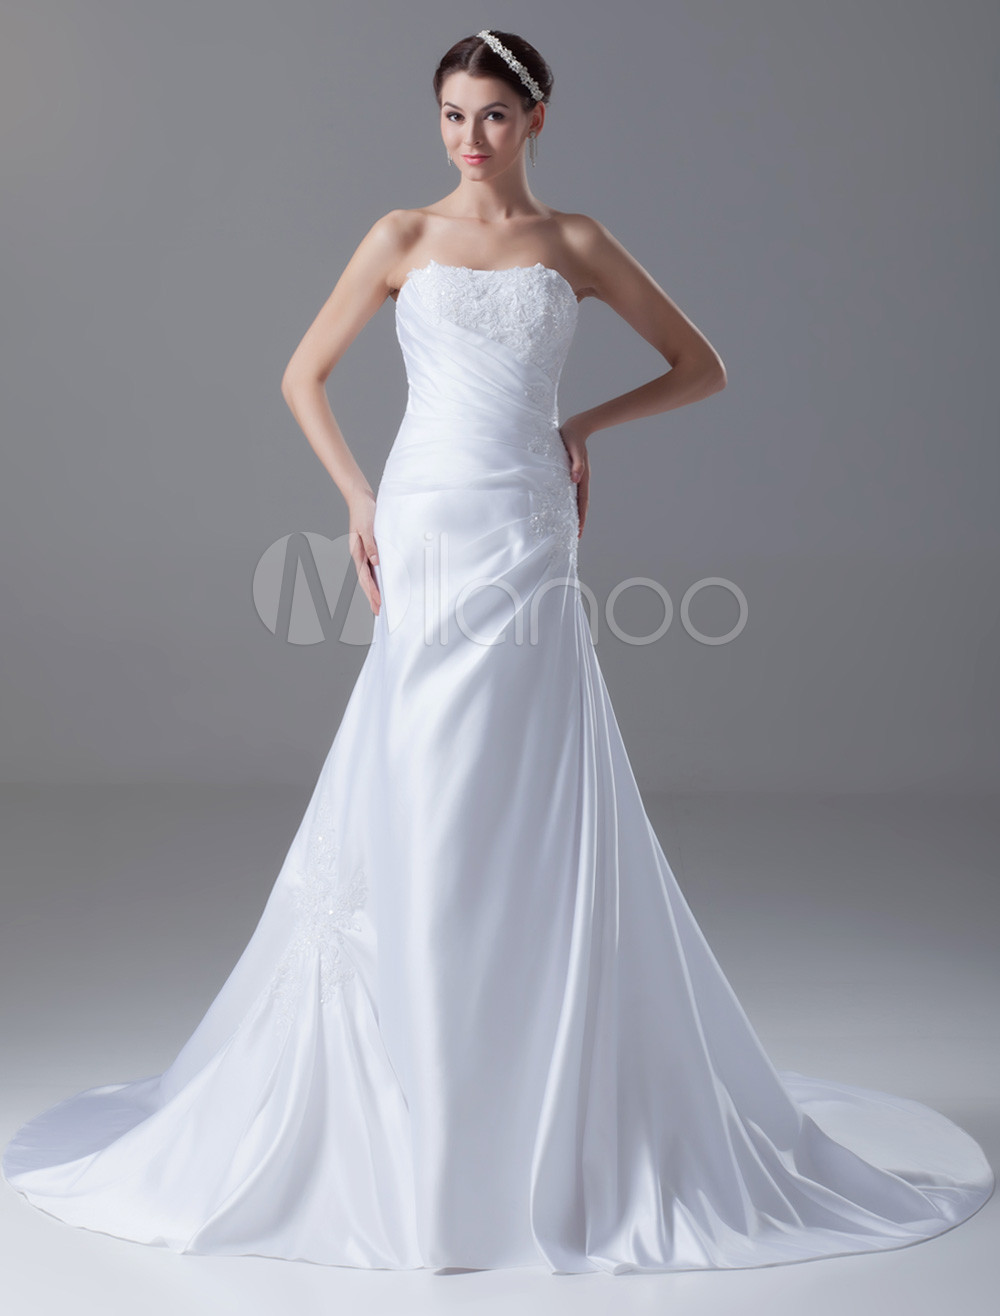 Court Train Strapless A-line White Wedding Dress For Bride with ...